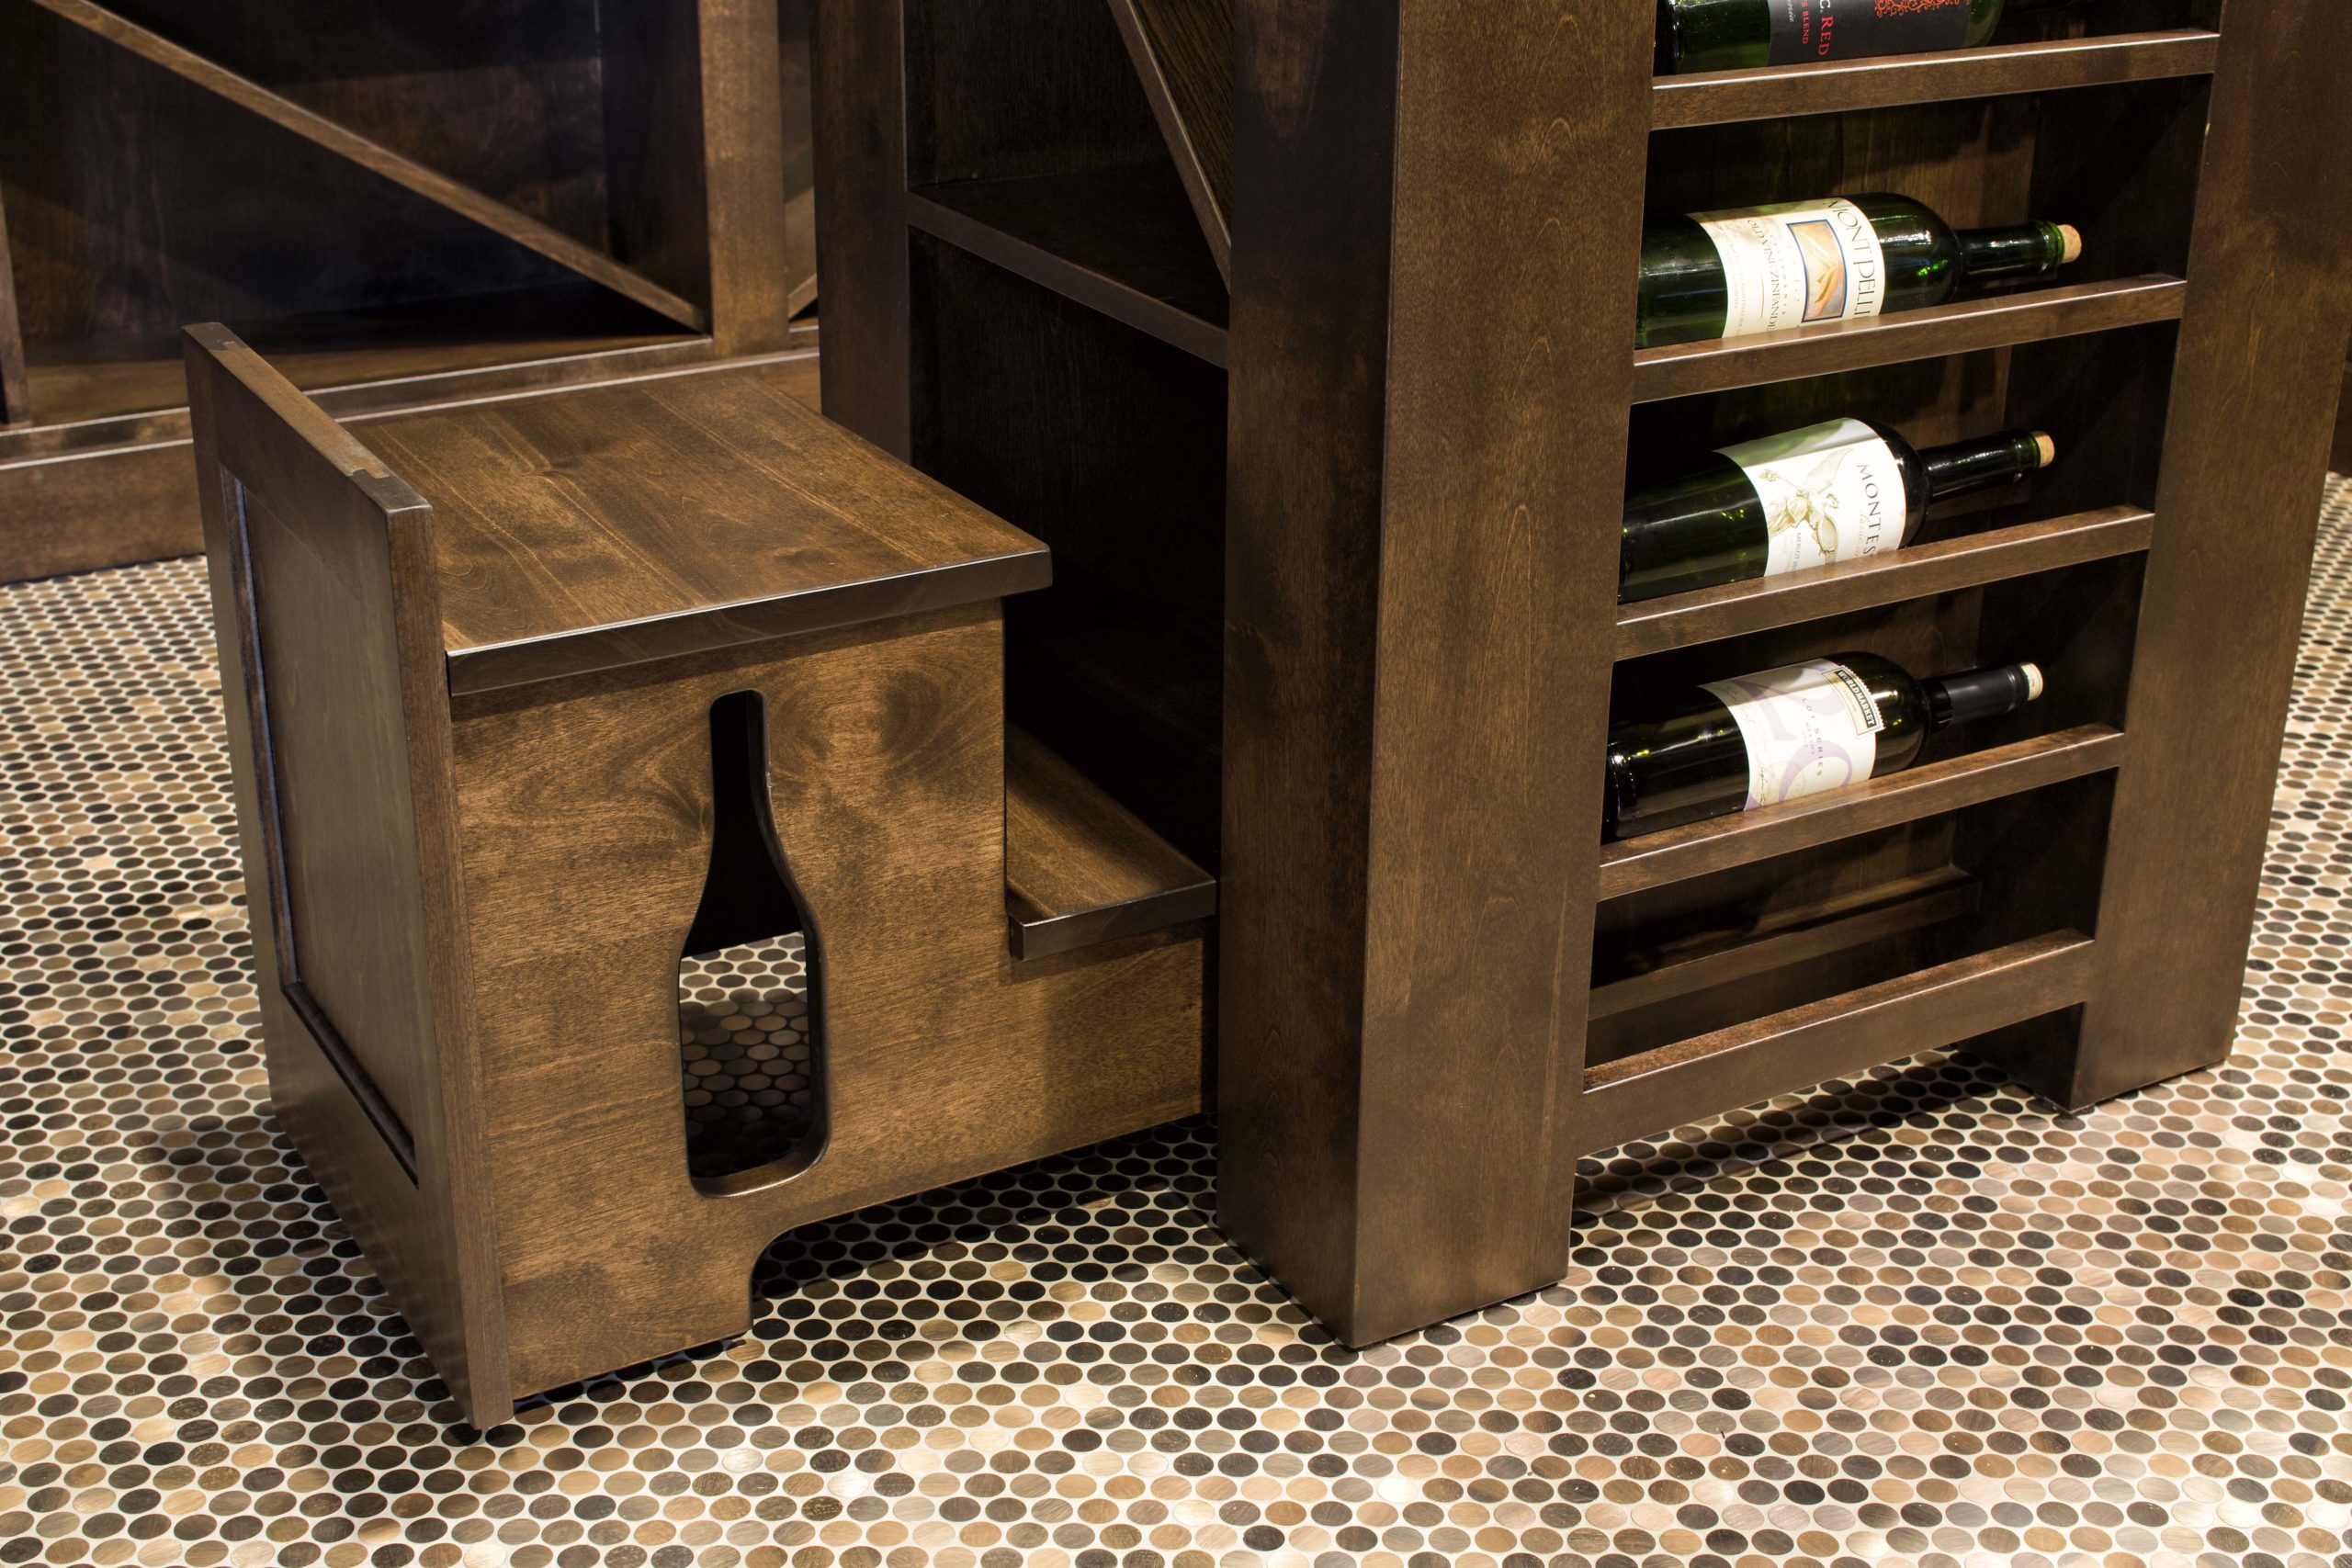 Wooden wine rack featuring bottles, perfect for an Edina remodel.